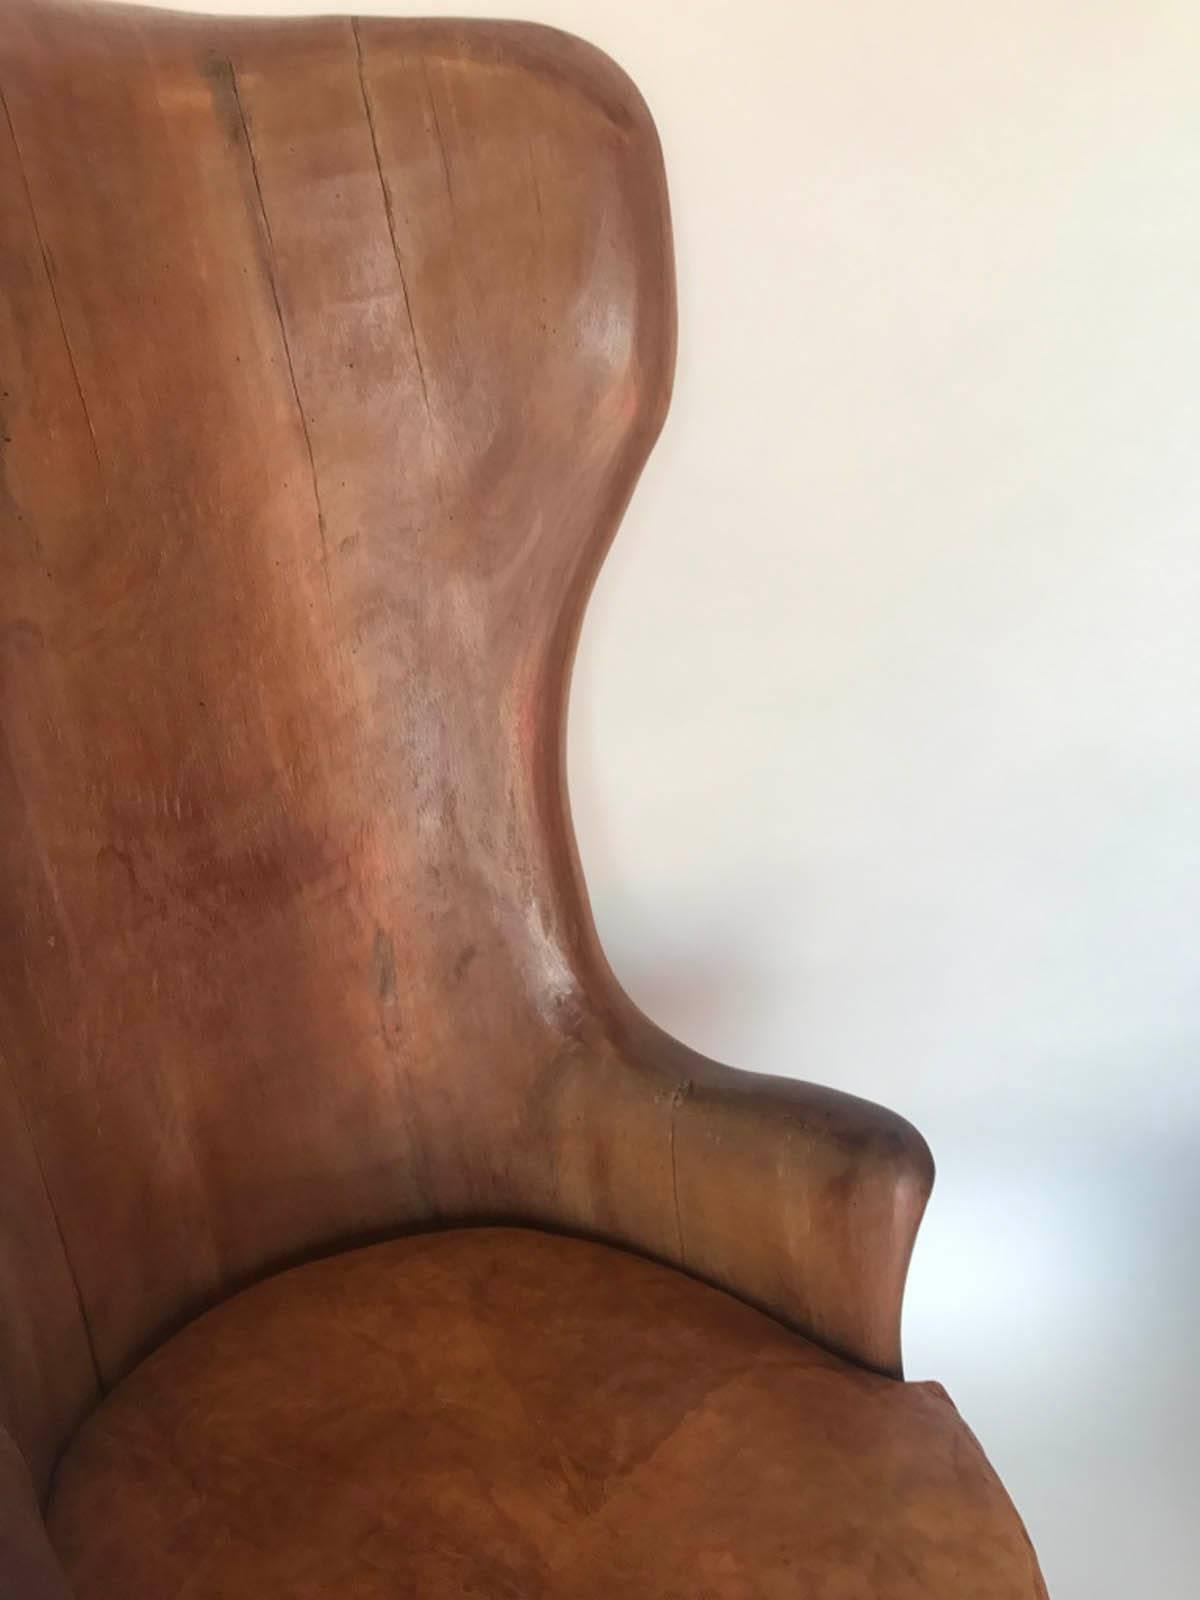 Guatemalan Organic Modern Graceful Mahogany Chair Carved from One Piece of Wood